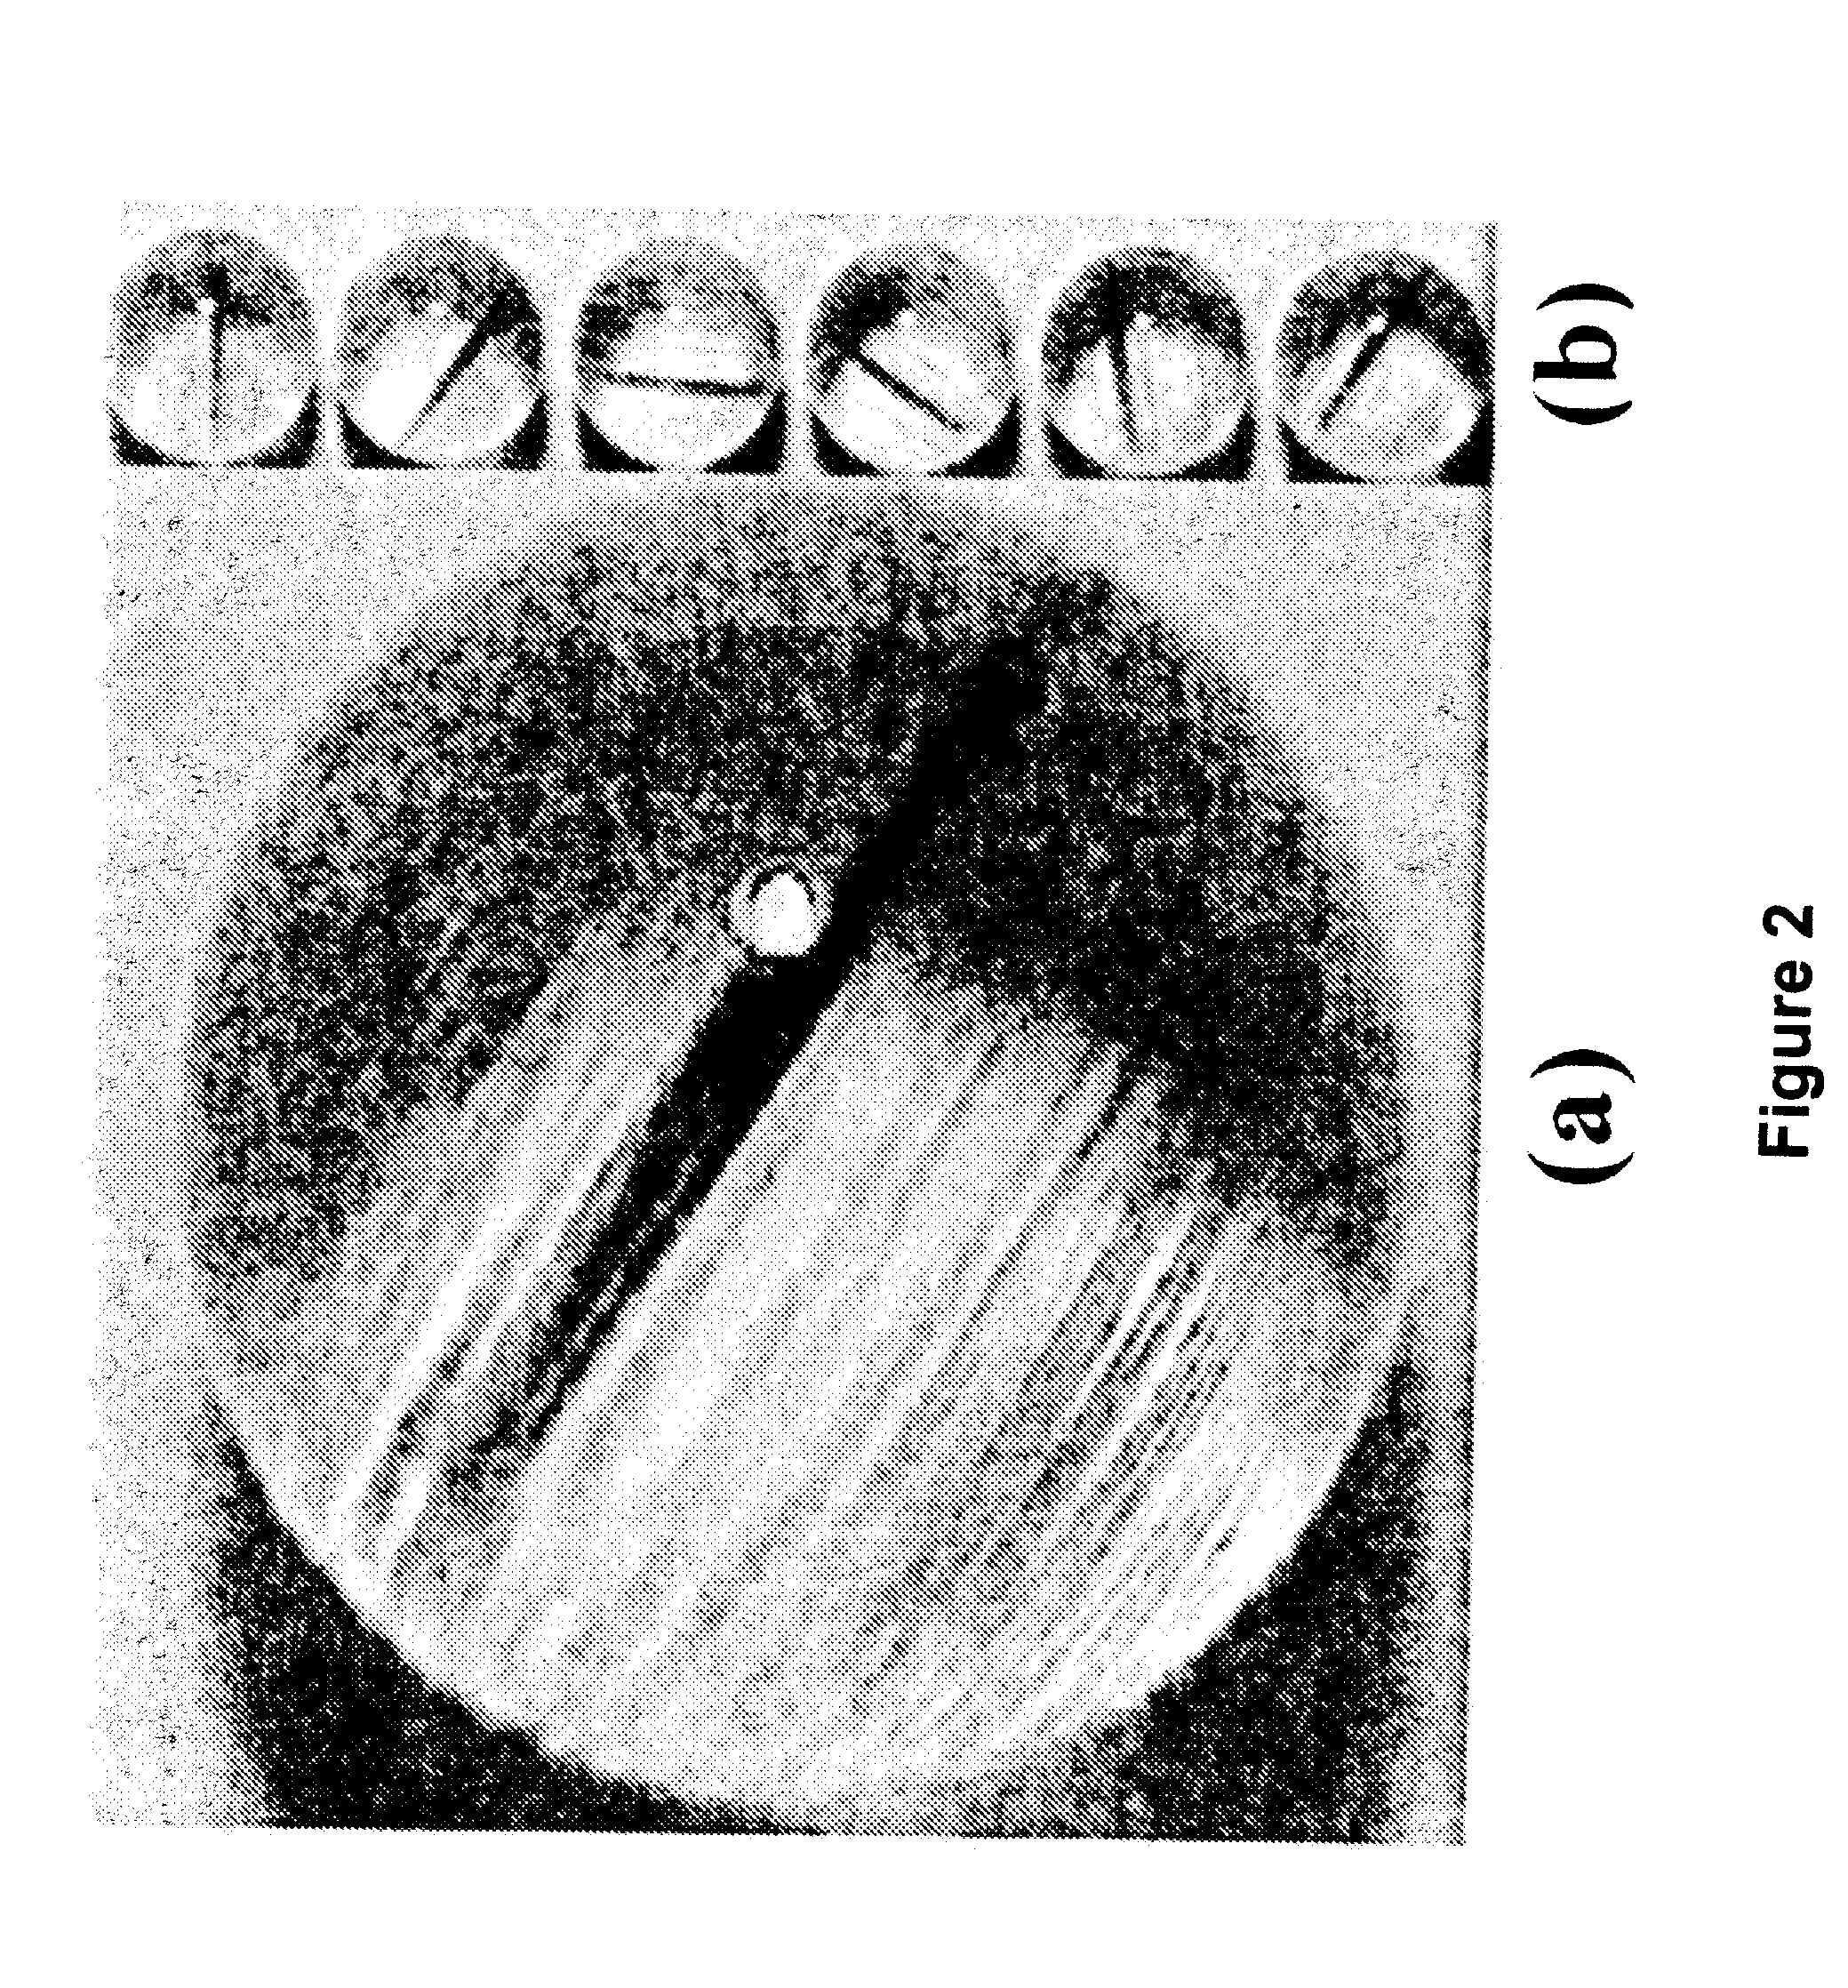 Method and apparatus for magnetic mixing in micron size droplets